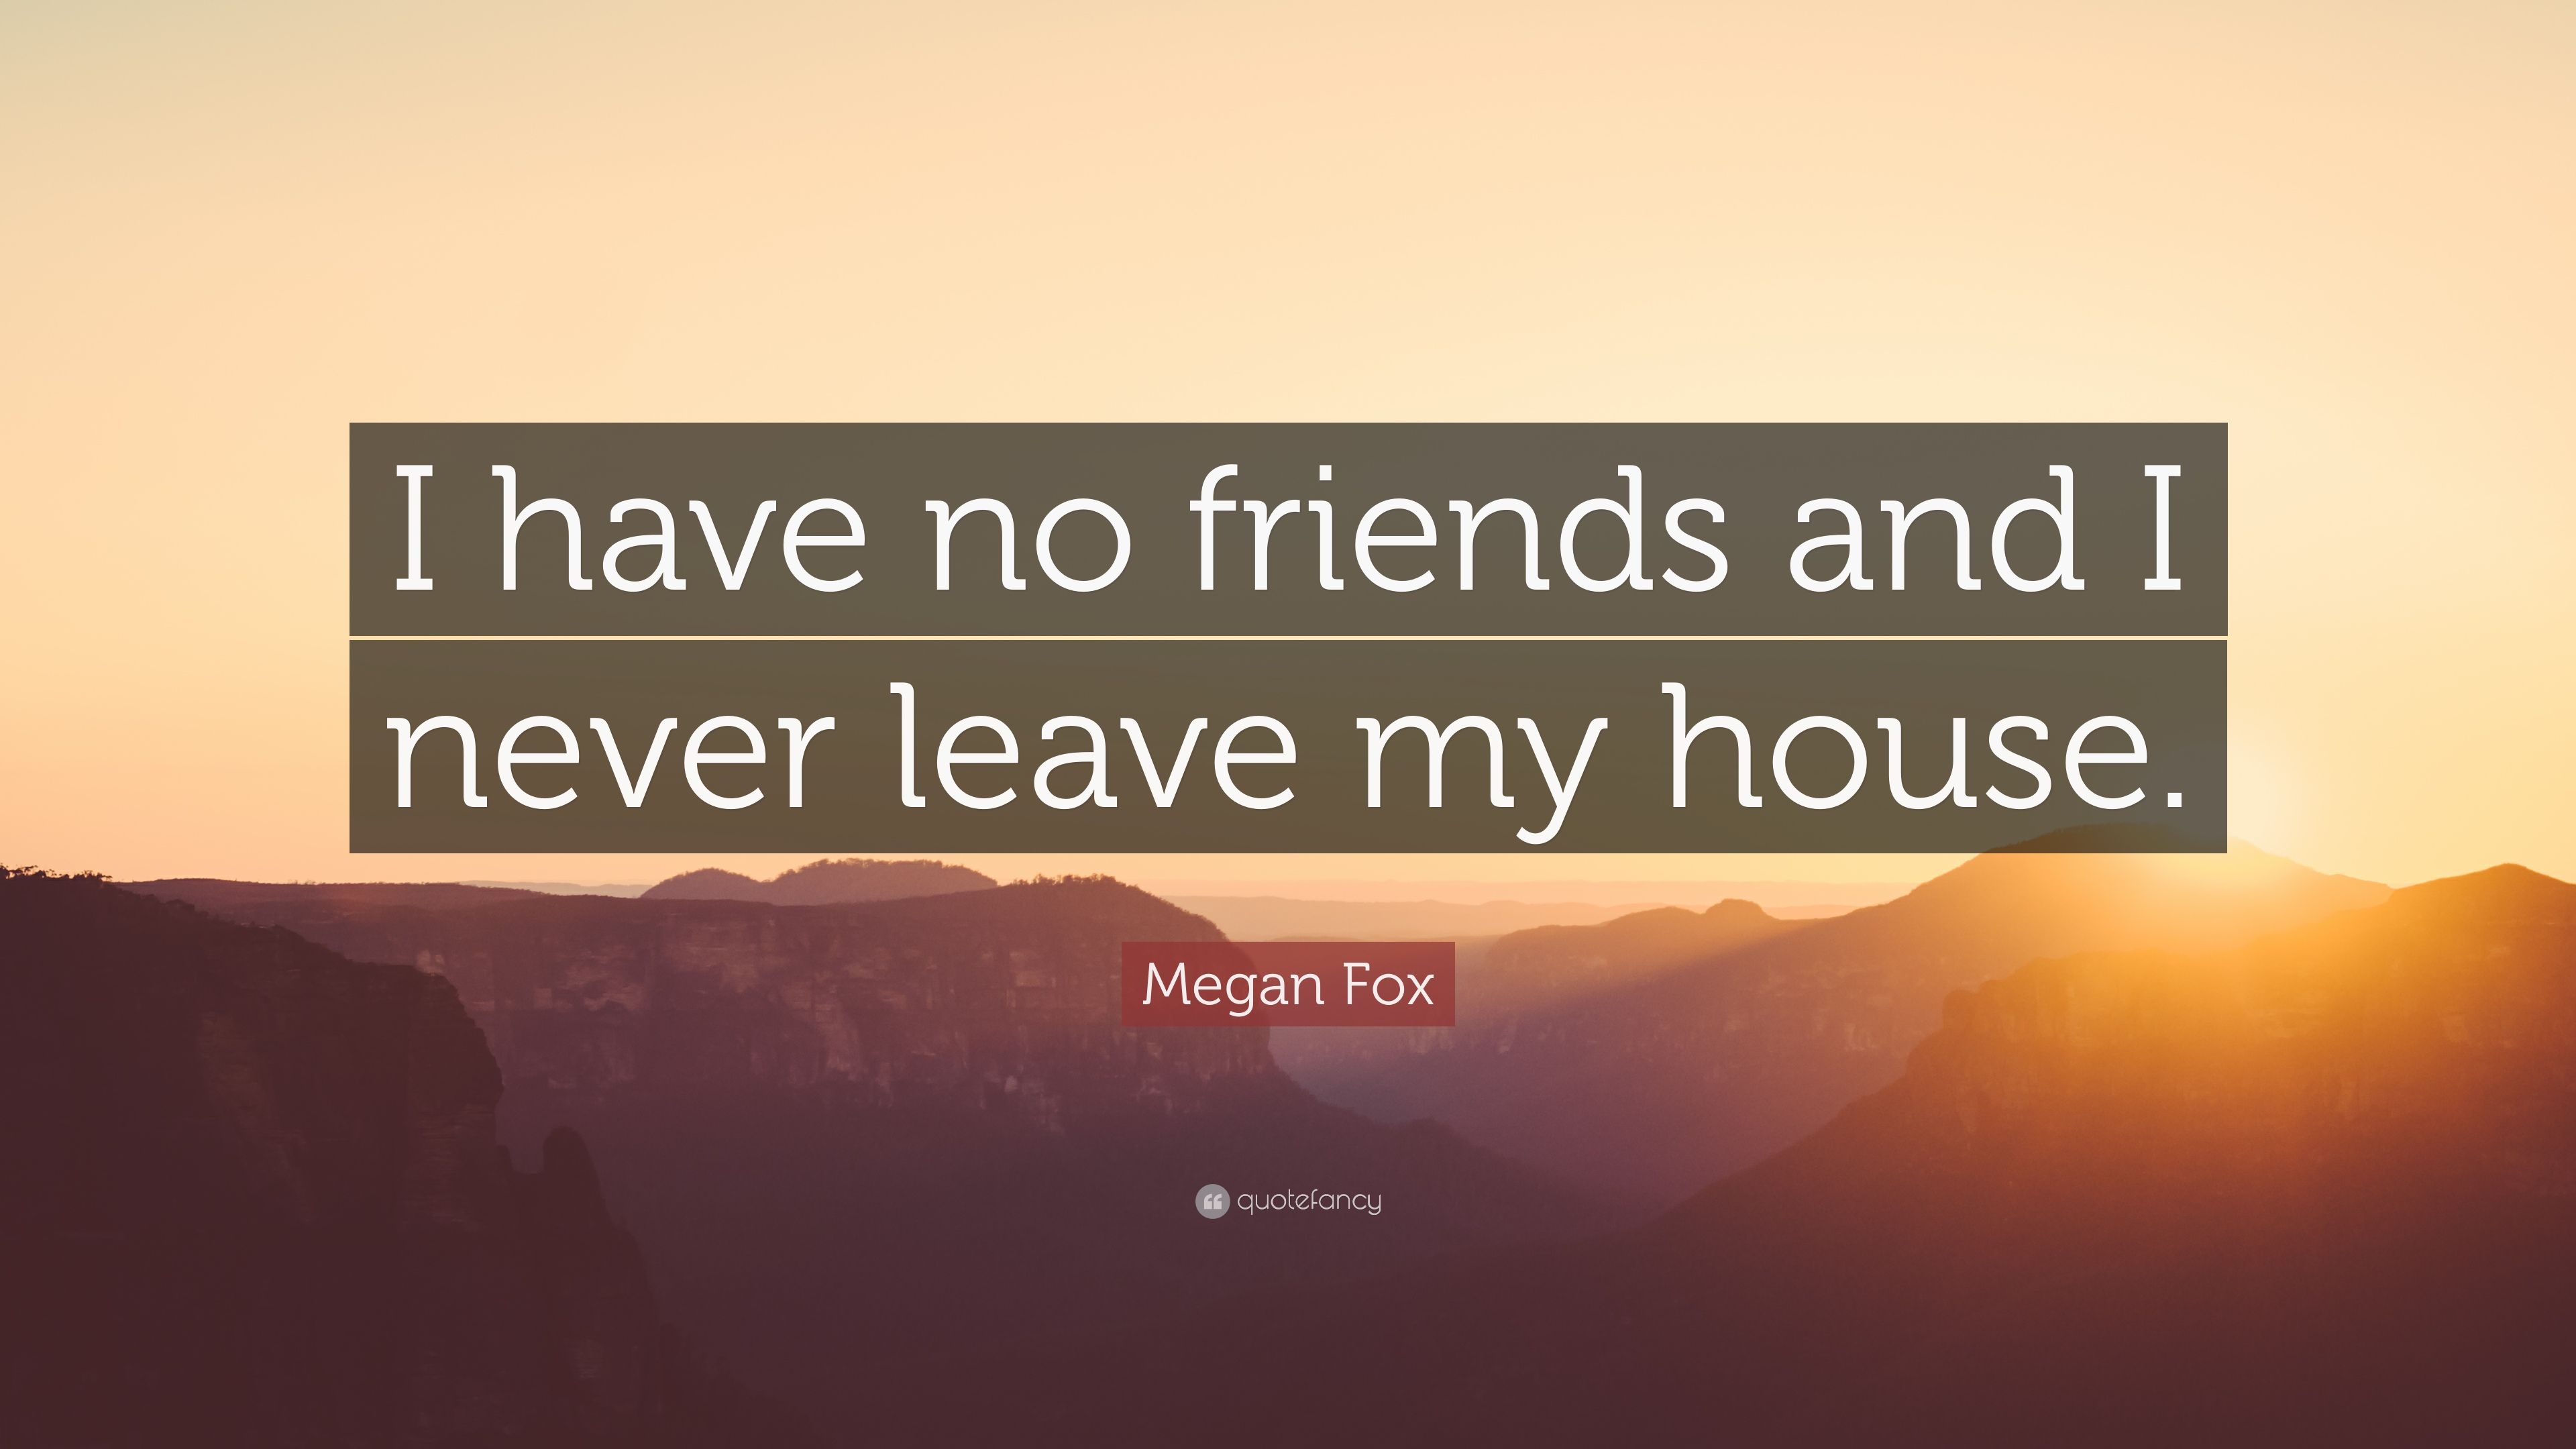 Megan Fox Quote: "I have no friends and I never leave my house. 